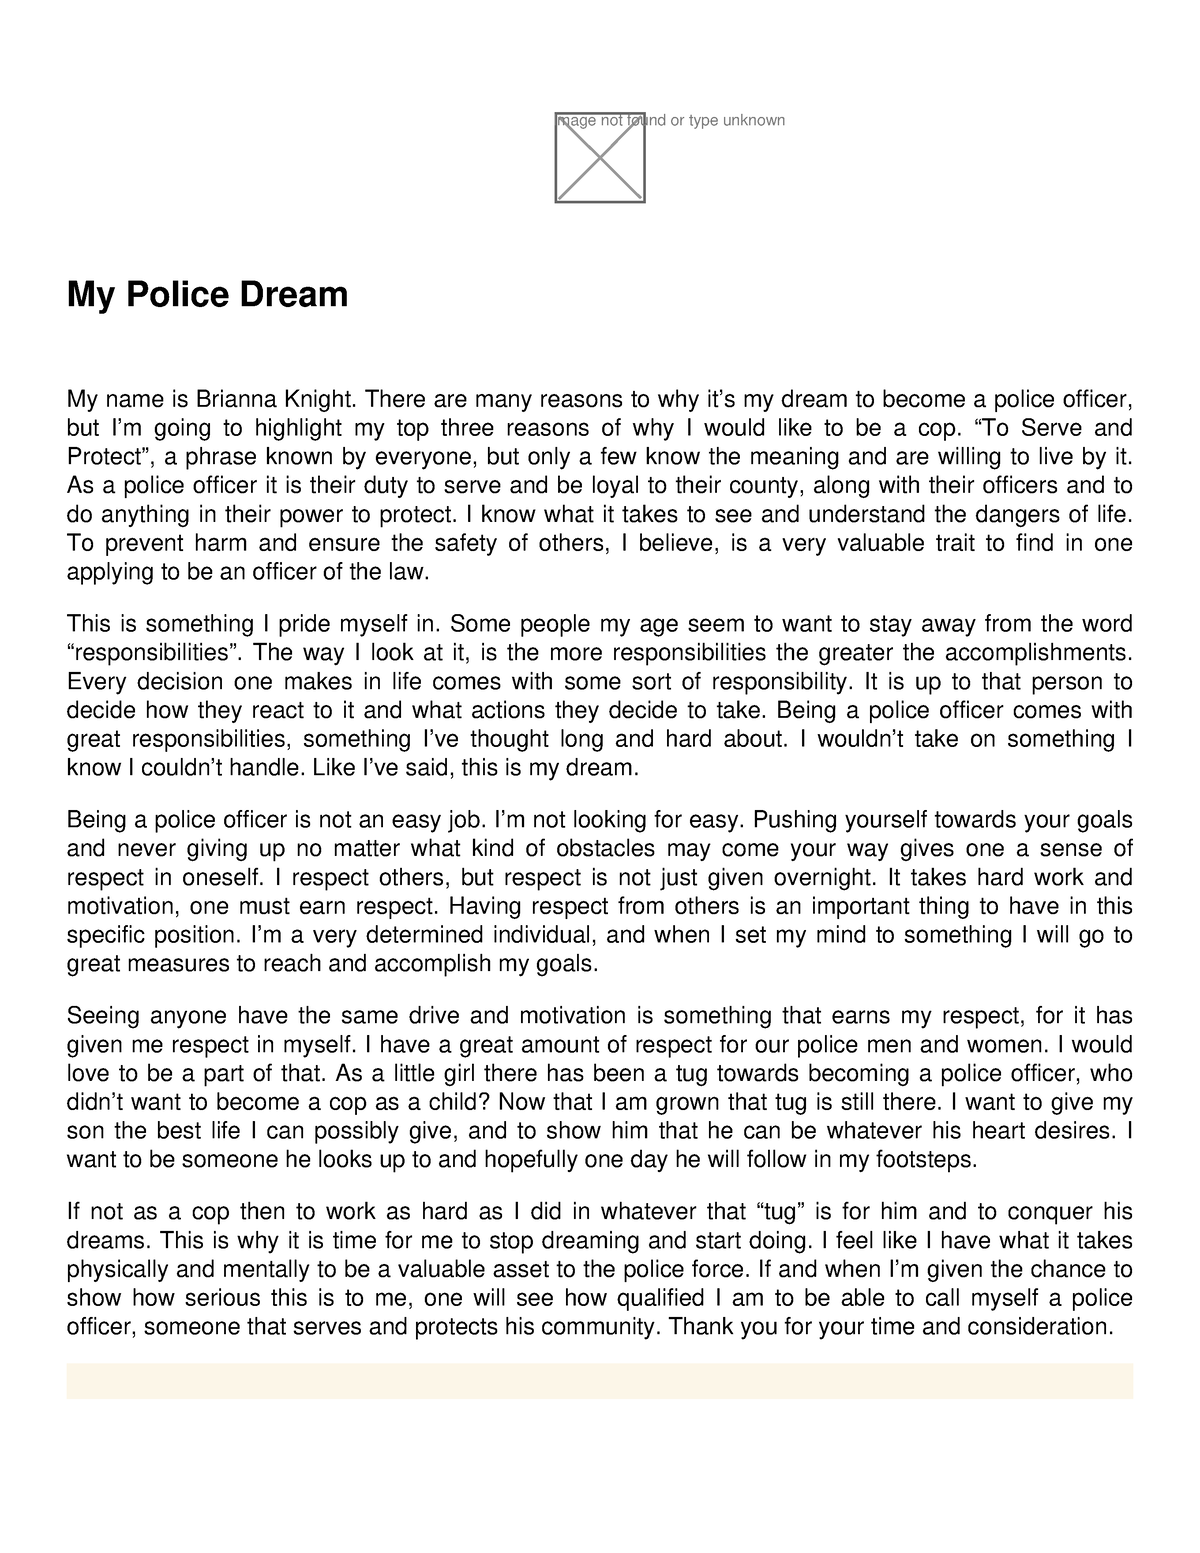 my dream is police essay